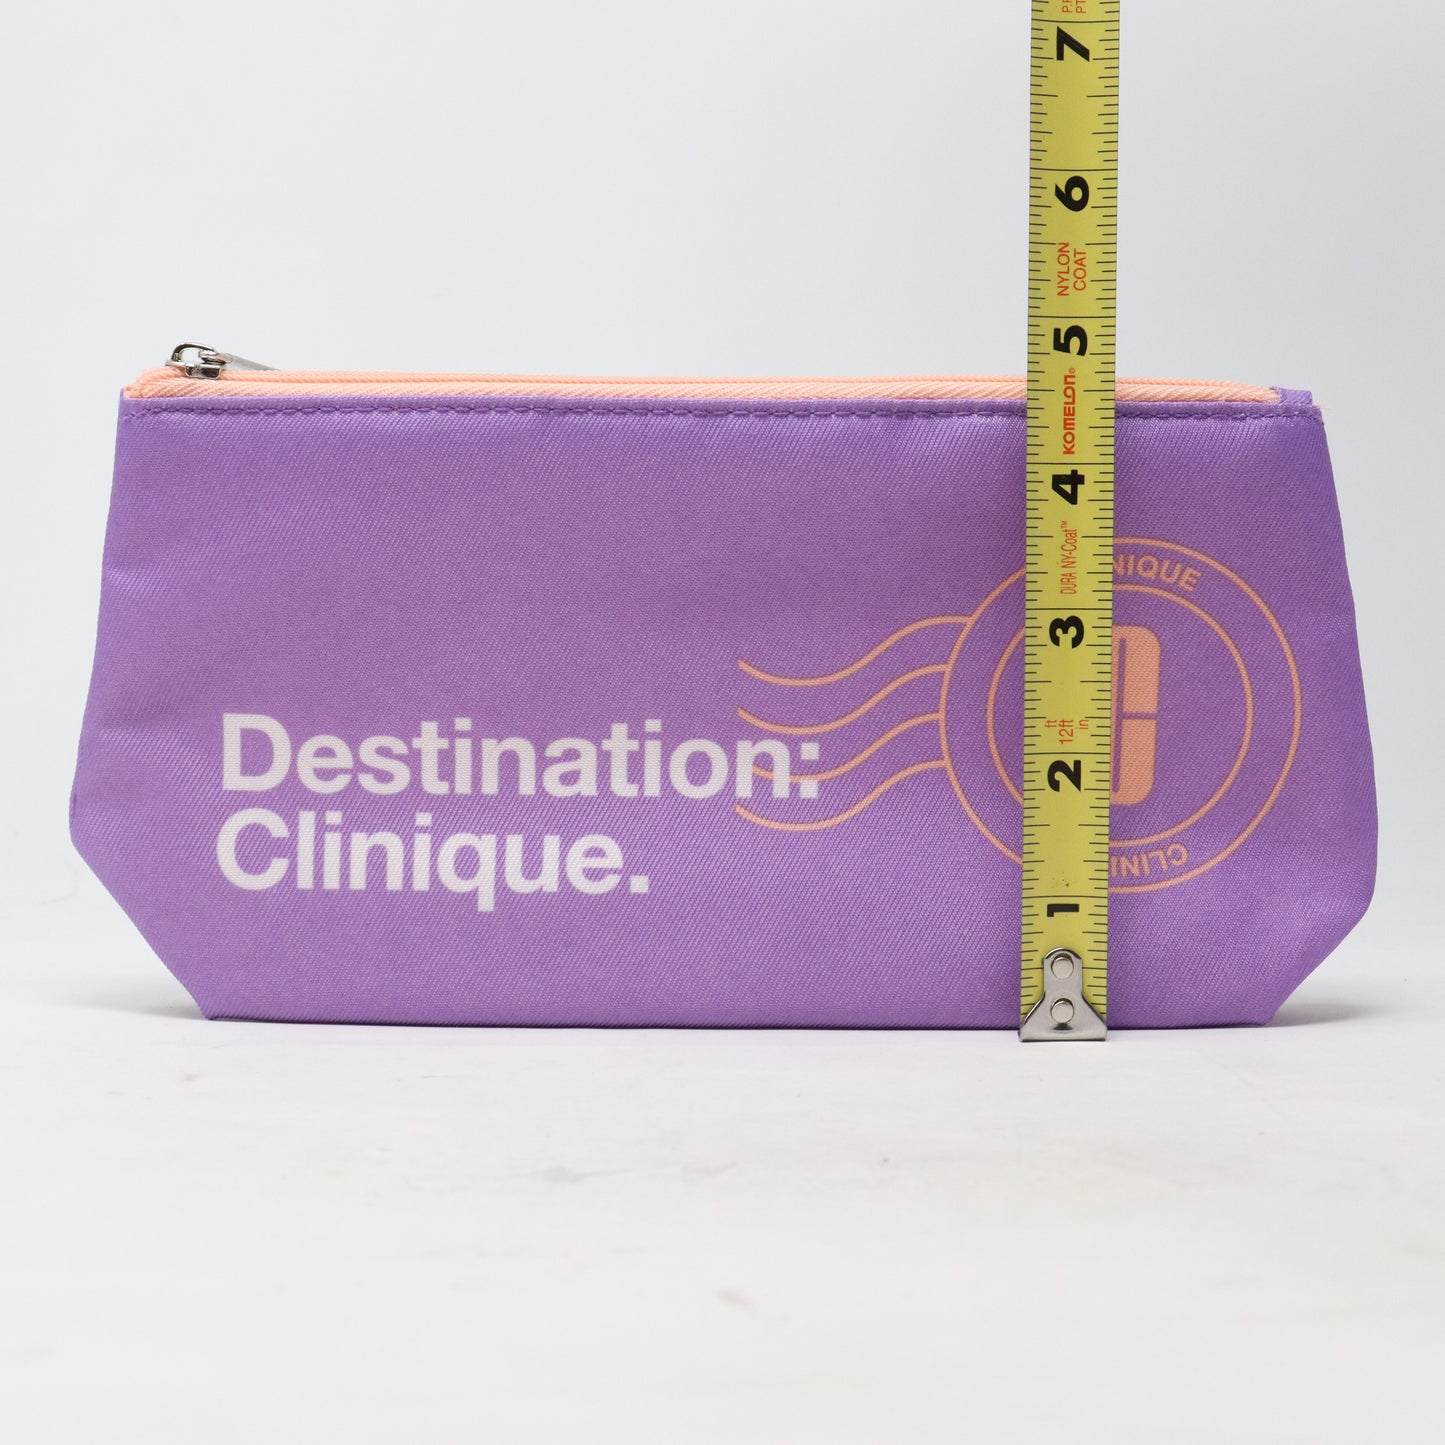 Clinique Purple/Pink Cosmetic Bag  / New